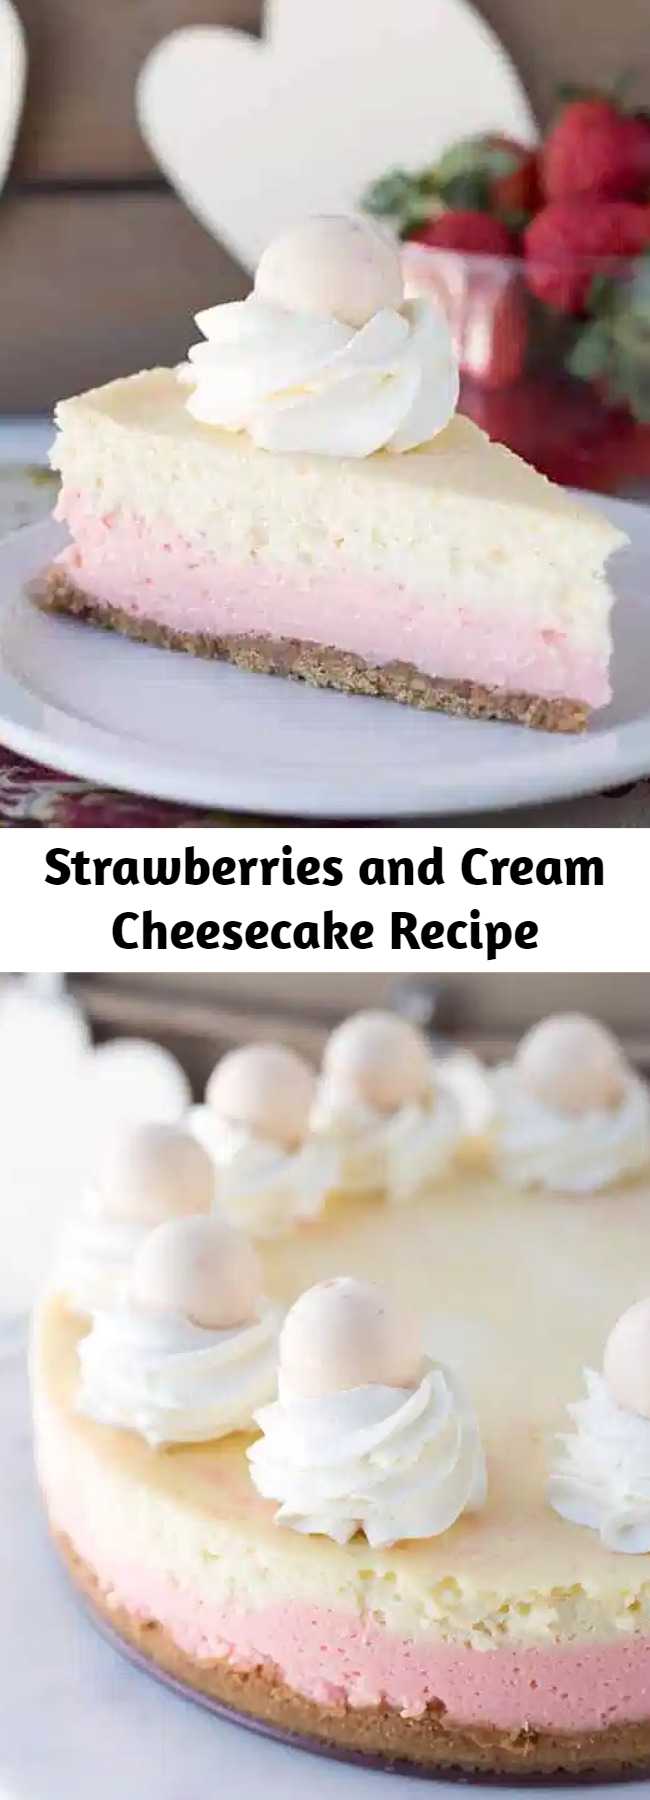 Strawberries and Cream Cheesecake Recipe - This cheesecake is packed full of flavor! There's a cookie crust, pink strawberry cheesecake layer, vanilla cheesecake layer, strawberries and cream truffles baked inside the cheesecake and topped with whipped cream and more strawberries and cream truffles! This is the perfect Valentine's Day cheesecake! #cheesecake #cheesecakerecipes #dessertrecipes #strawberries